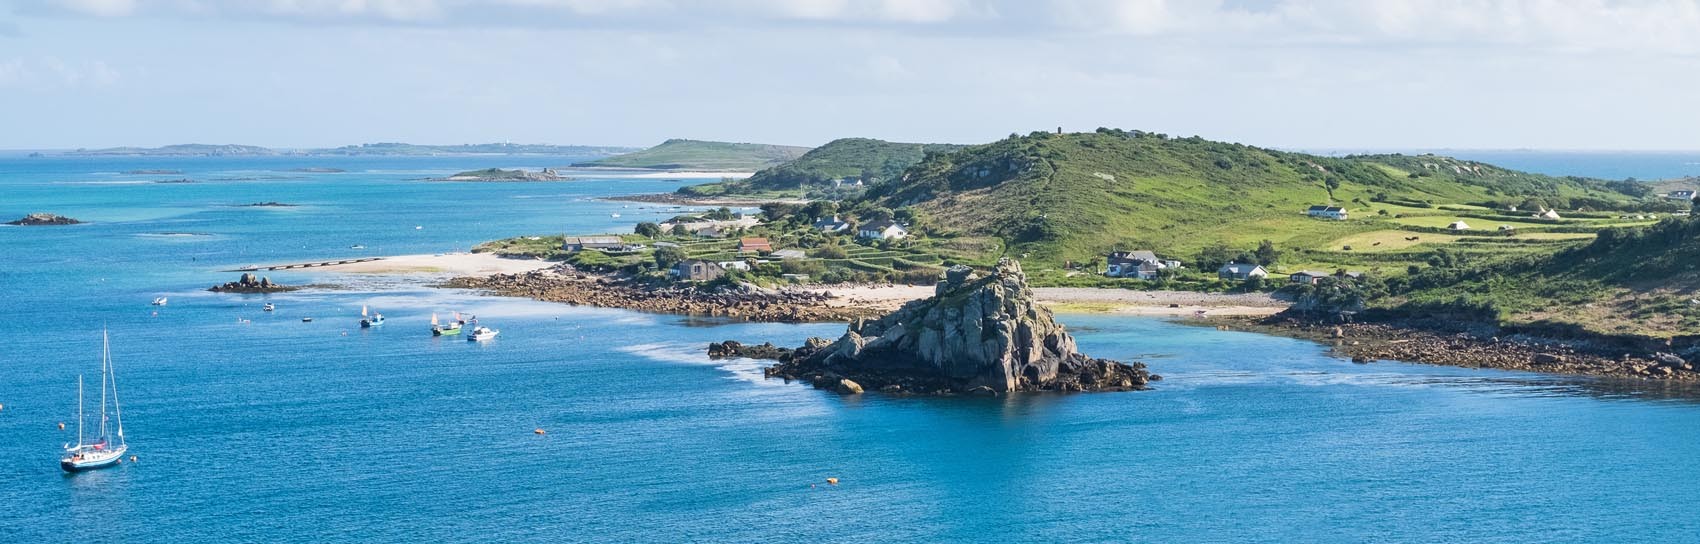 The Isles of Scilly. Photograph by NEIL DUGGAN